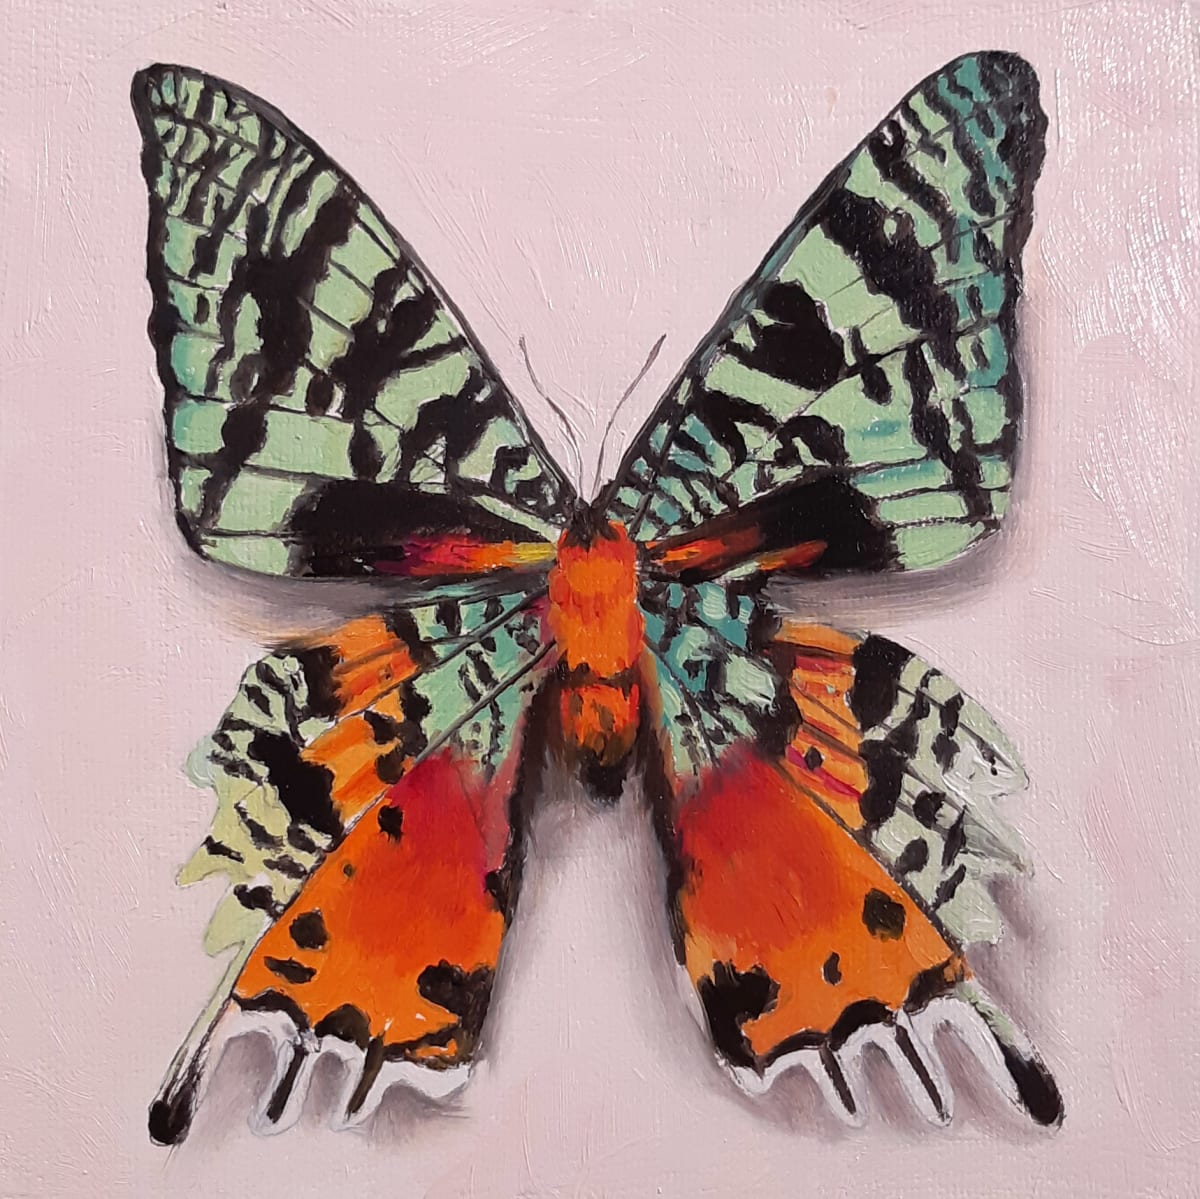 Small Sunset Moth by Catherine Mills  Image: Small Sunset Moth, 6 x 6 inches on gallery wood panel